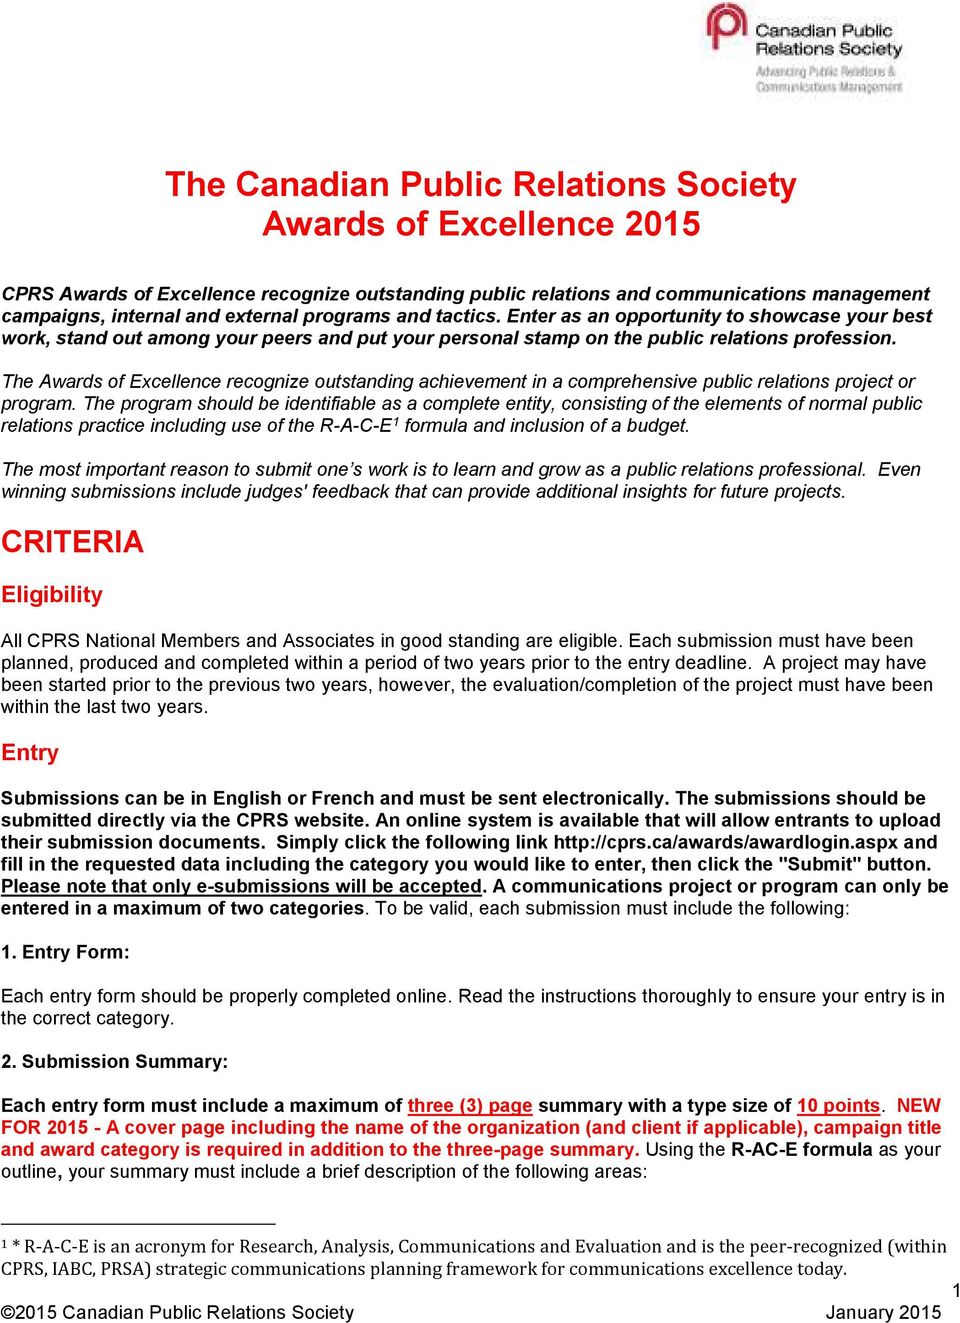 The Awards of Excellence recognize outstanding achievement in a comprehensive public relations project or program.